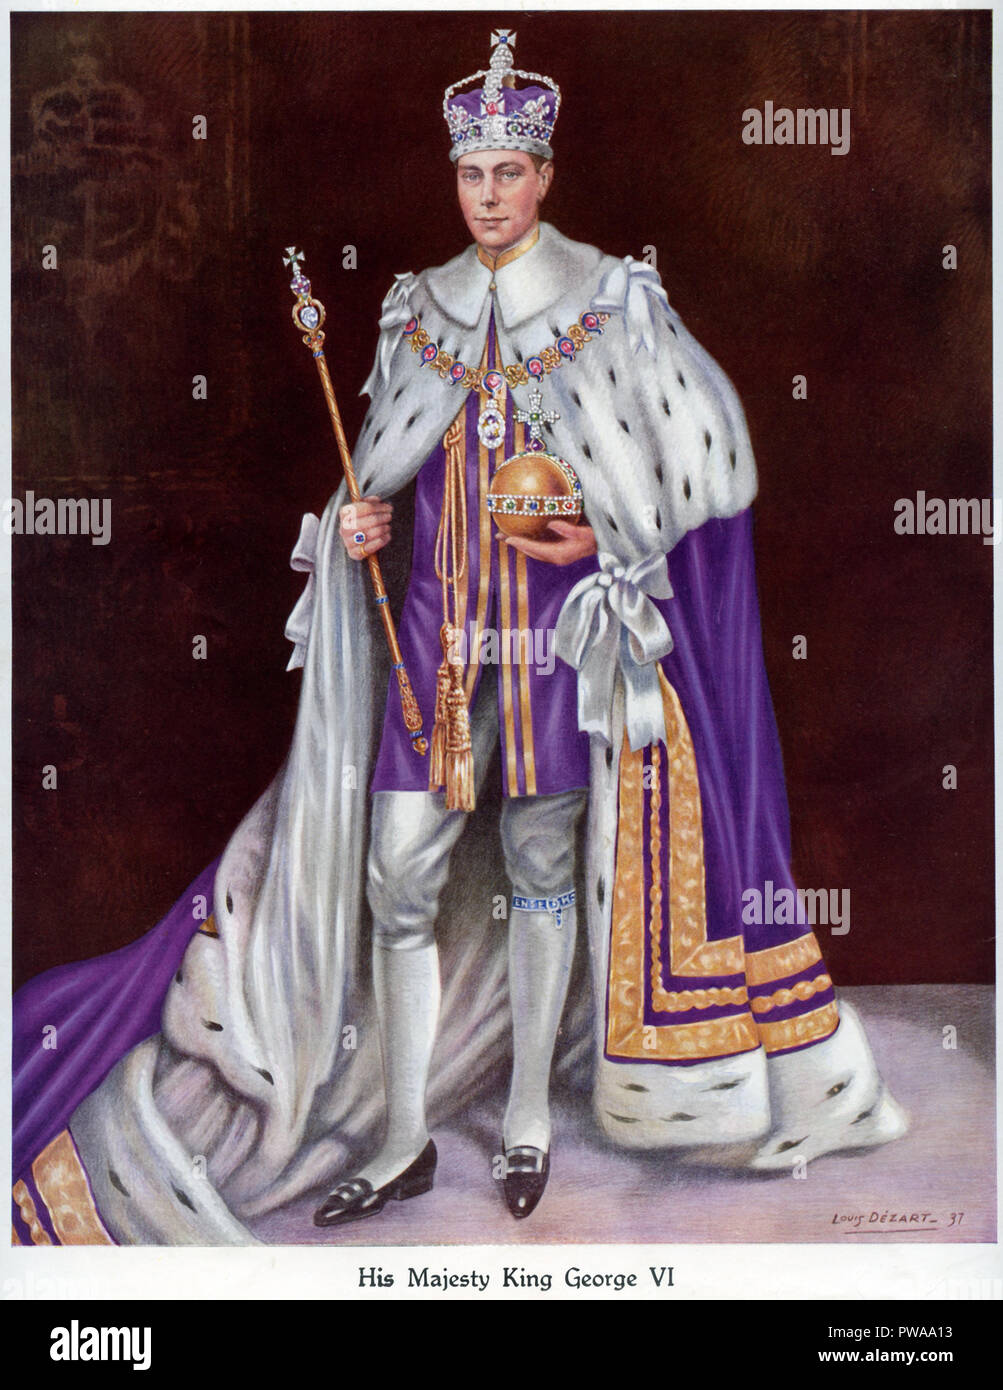 A coronation portrait of King George the sixth on May 12 1937 showing the king wearing his coronation robes the crown and carrying the orb and sceptre published in a coronation souvenir book published by the Daily Express dated 1937 and painted by Louis Dezart Stock Photo